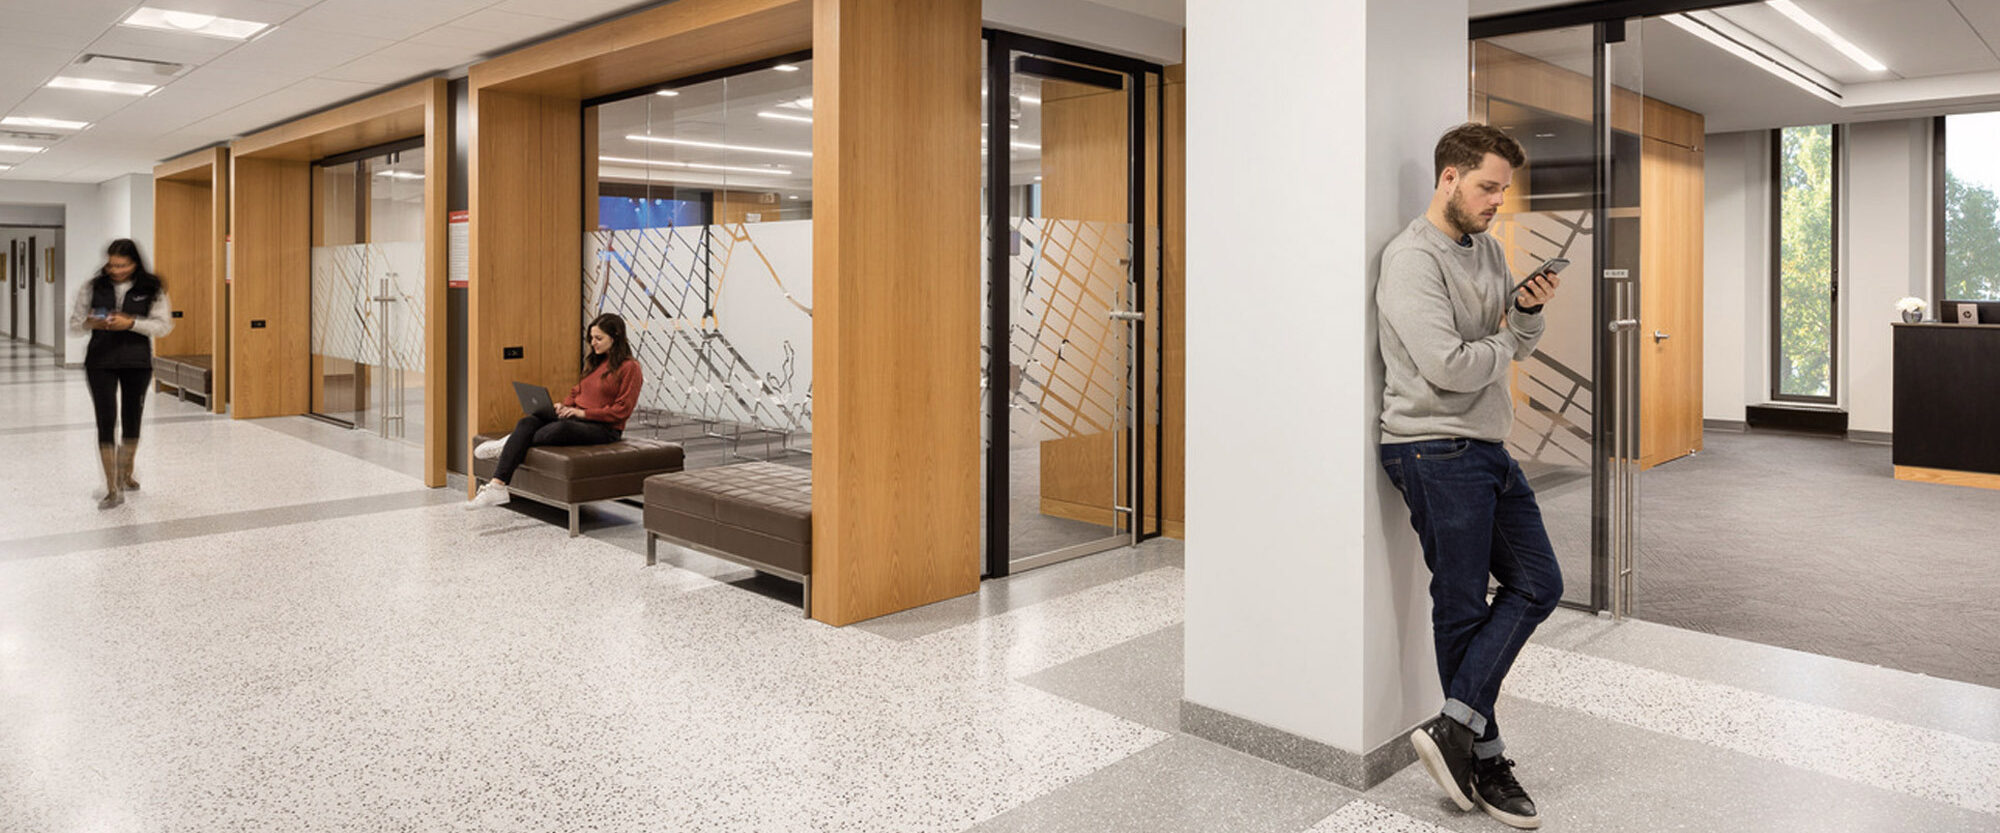 Modern office corridor featuring terrazzo flooring, neutral color palette, recessed lighting, and glass partition walls with etched geometric patterns. Wood paneling on doors adds a warm touch, juxtaposed with clean white columns and walls, offering a professional yet inviting atmosphere.